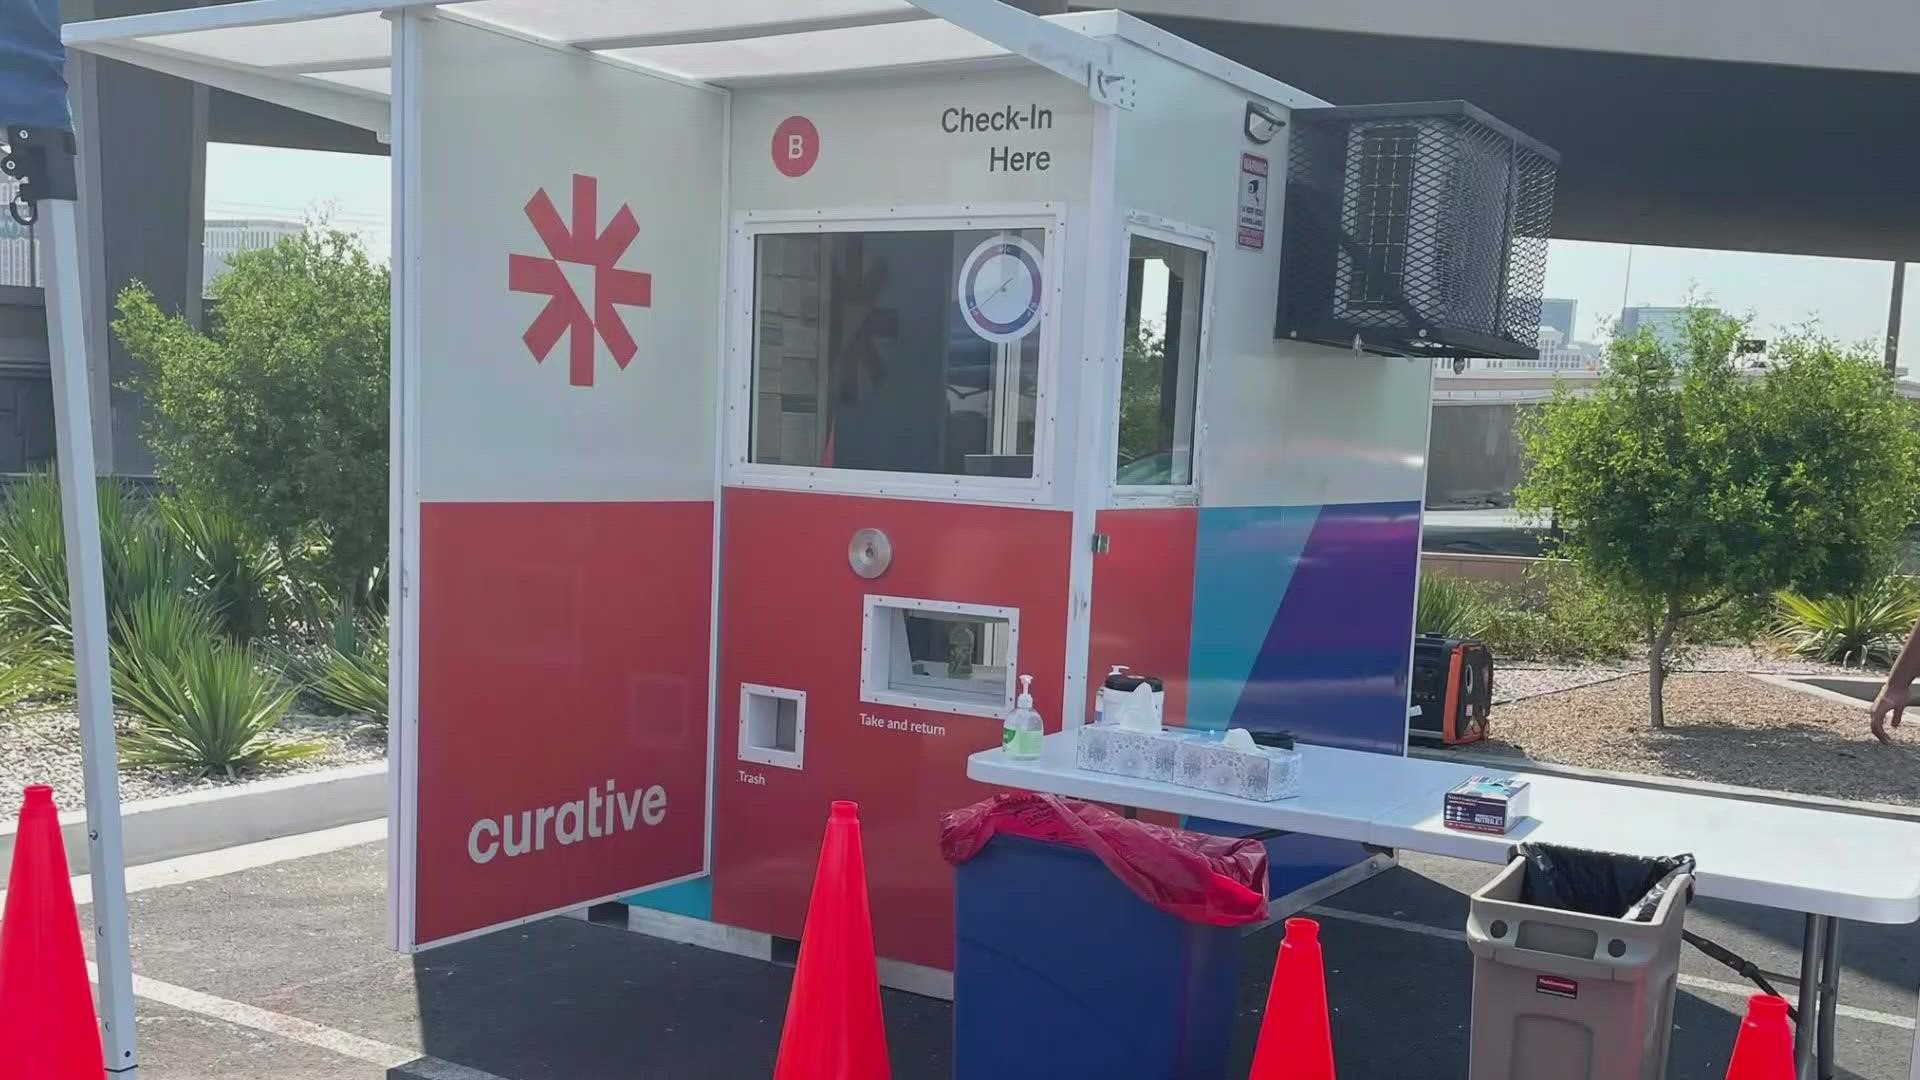 According to city officials, Curative, Inc wants to provide a testing kiosk for travelers and locals alike.